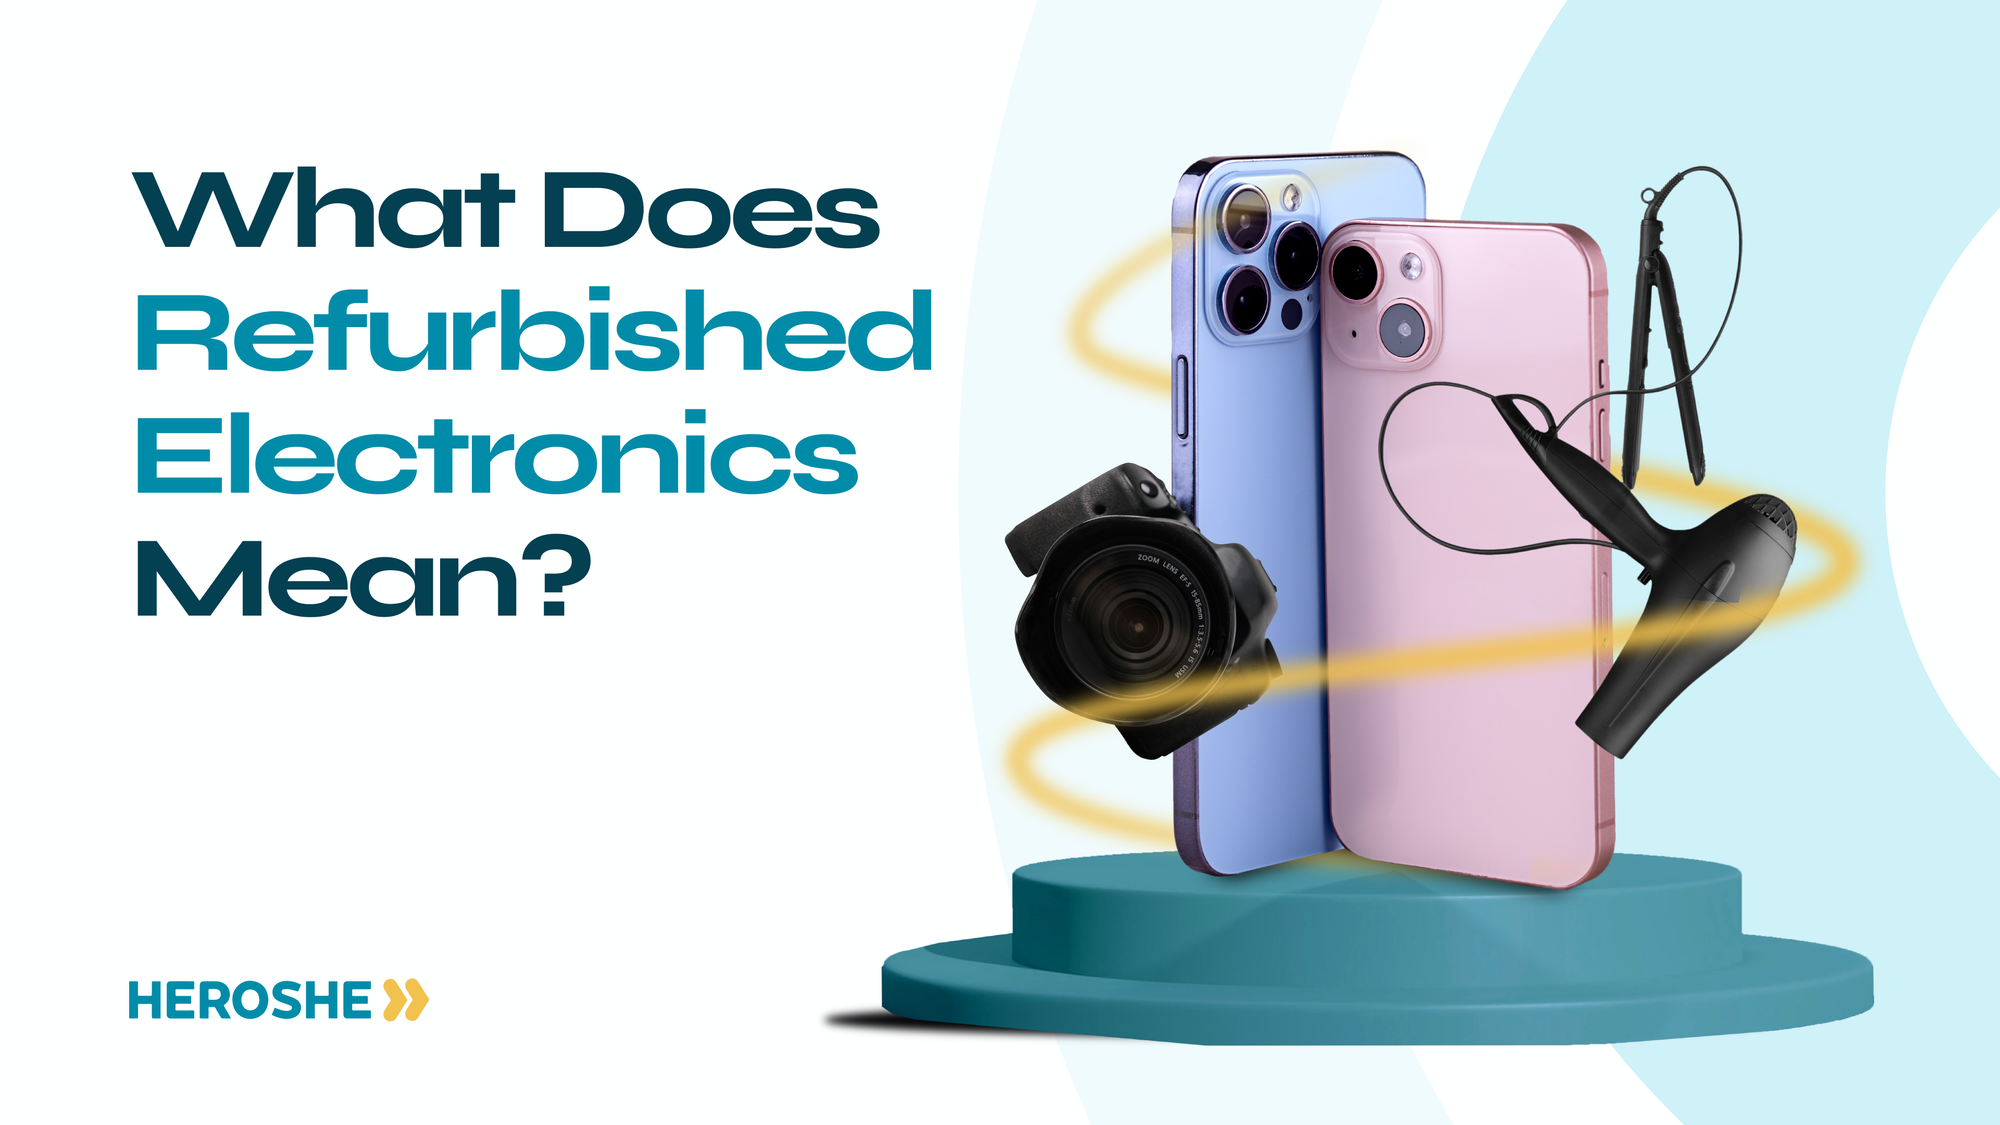 What Does Refurbished Electronics Mean?